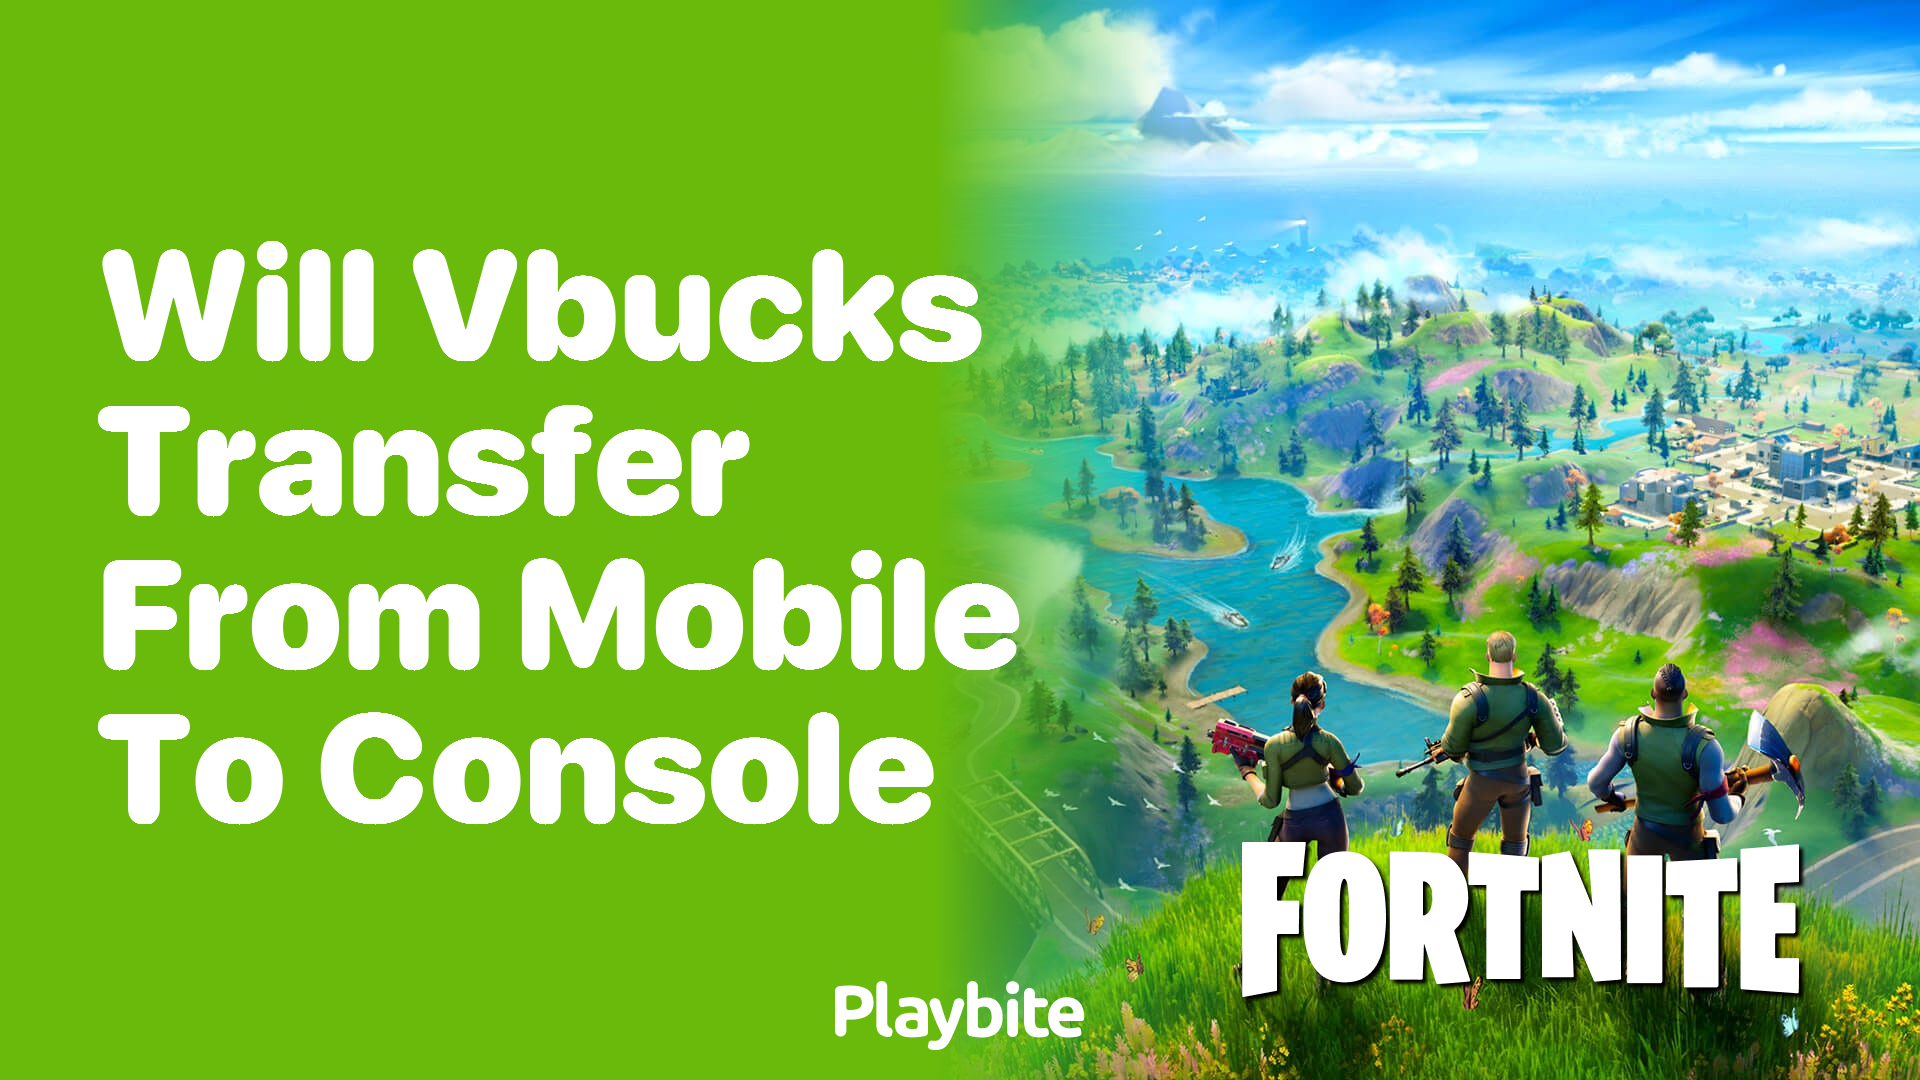 Will VBucks Transfer From Mobile to Console?